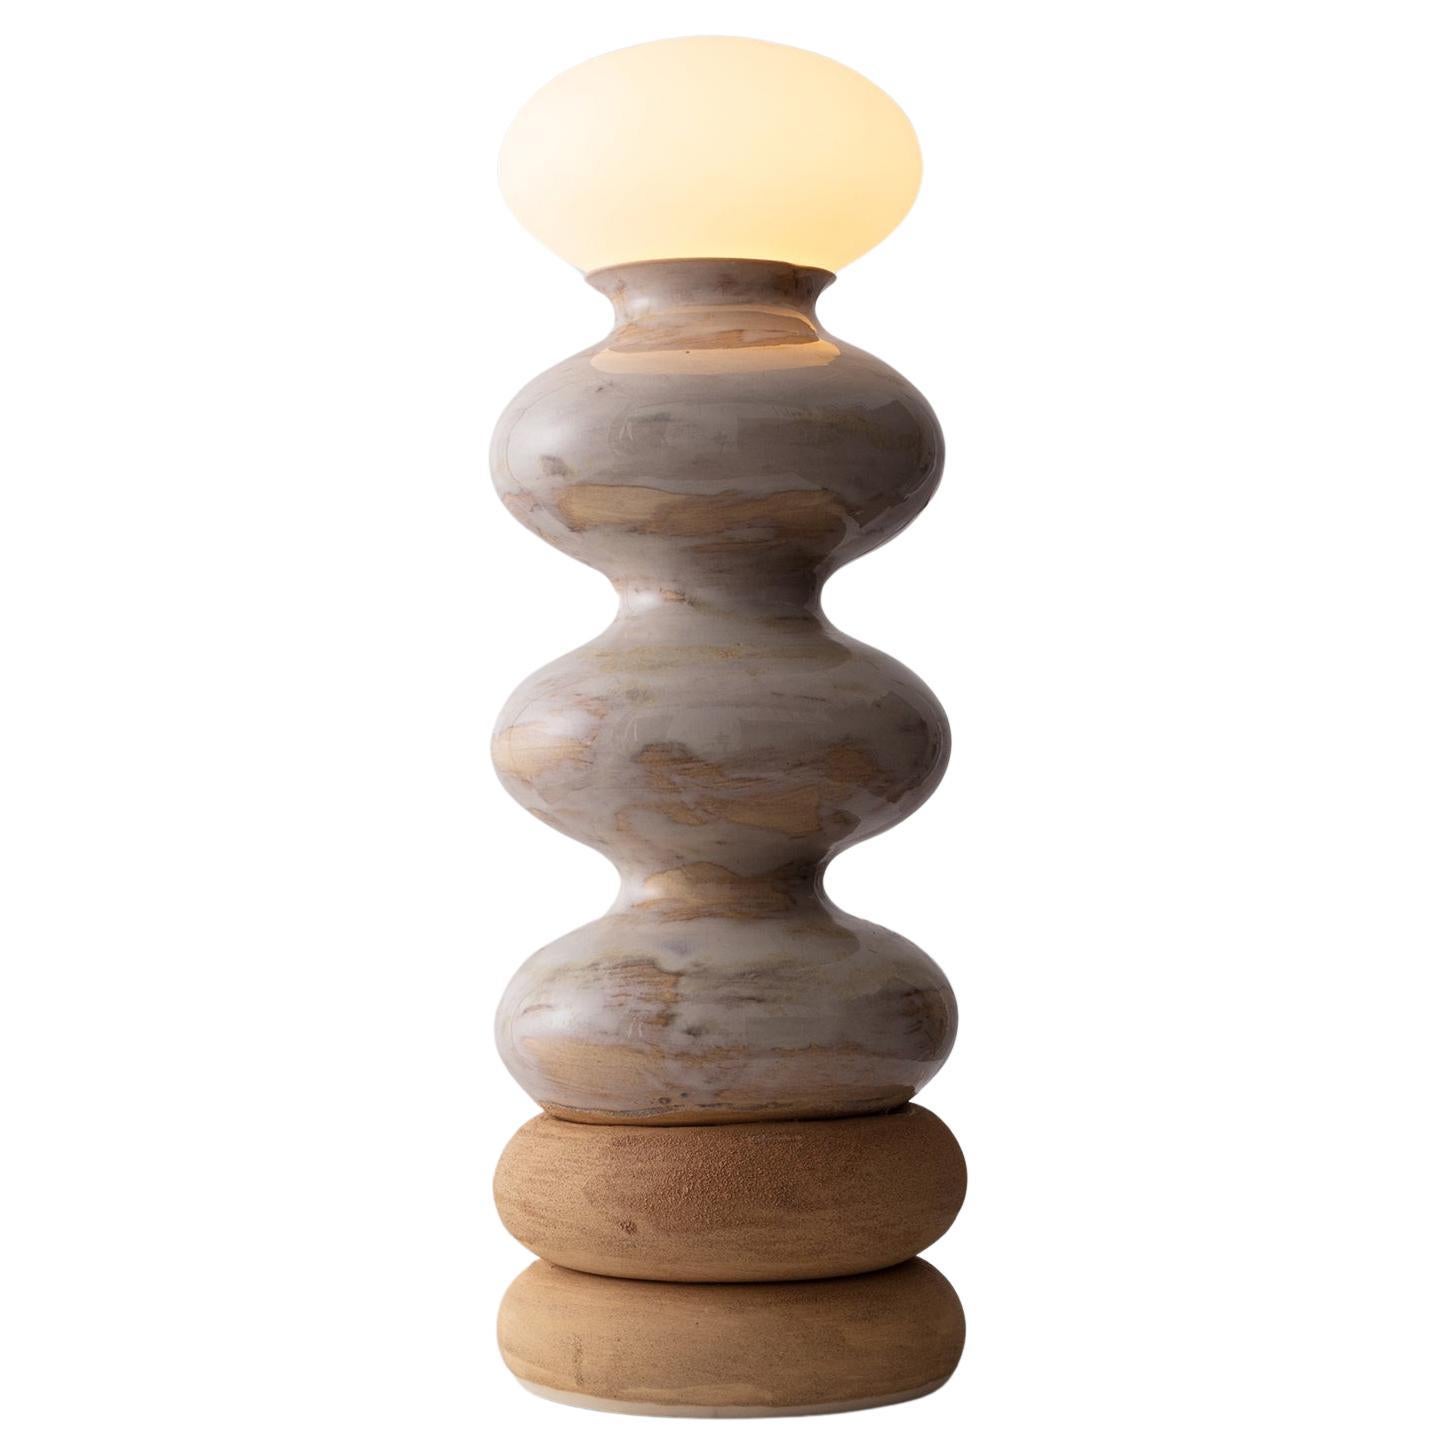 Wave Form Table Lamp "Slumped" in Hand Brushed Cream Glaze by Forma Rosa Studio For Sale